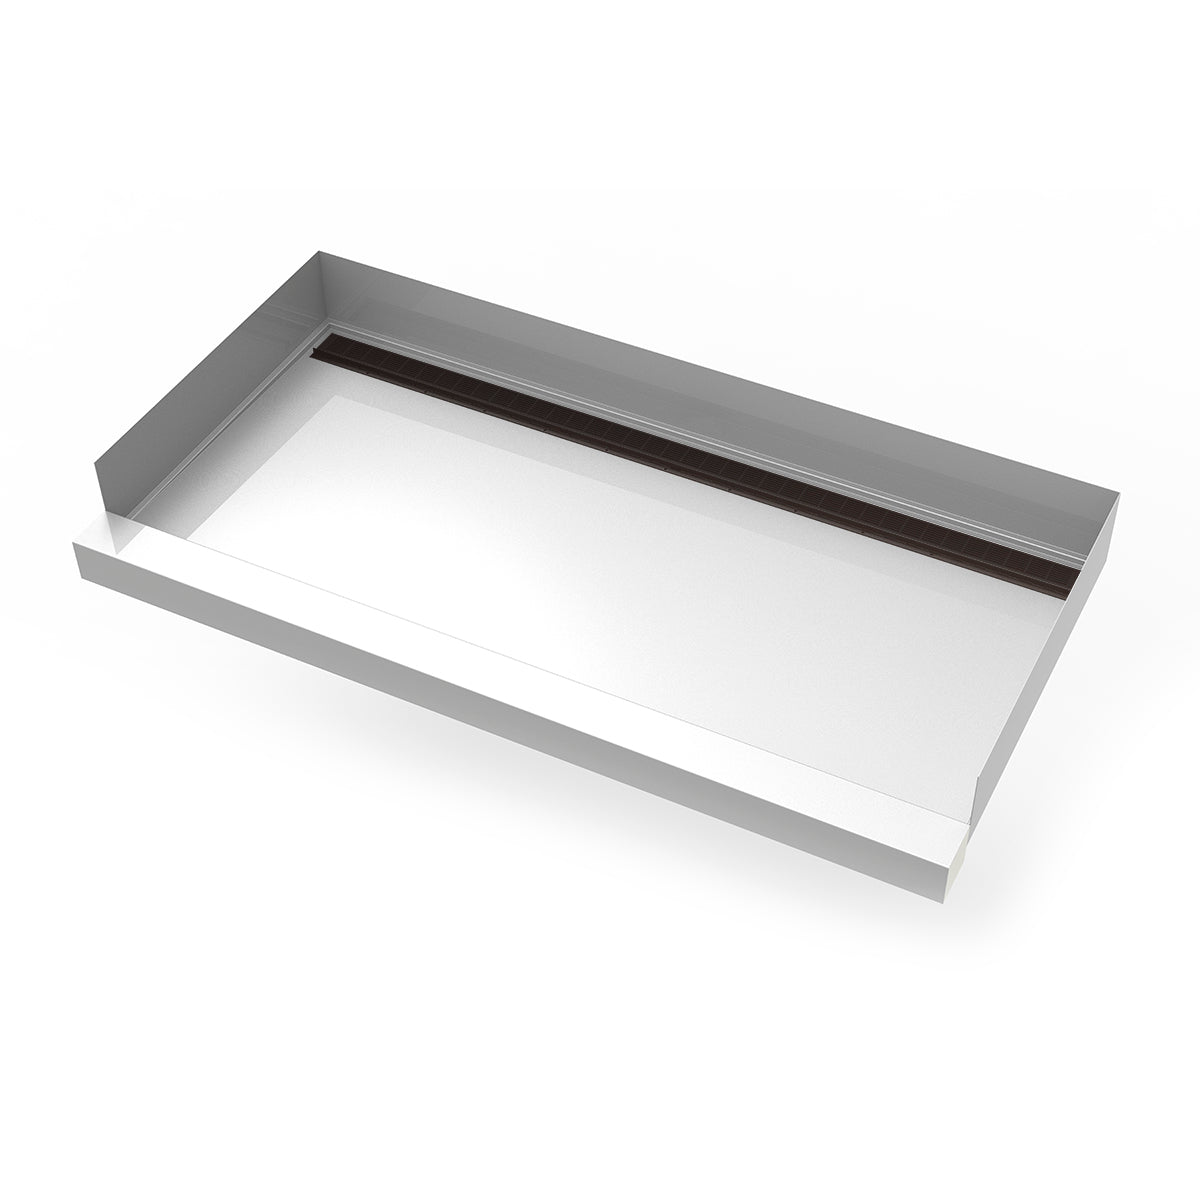 Infinity Drain 30"x 60" Stainless Steel Shower Base with Back Wall Slotted Pattern Linear Drain location